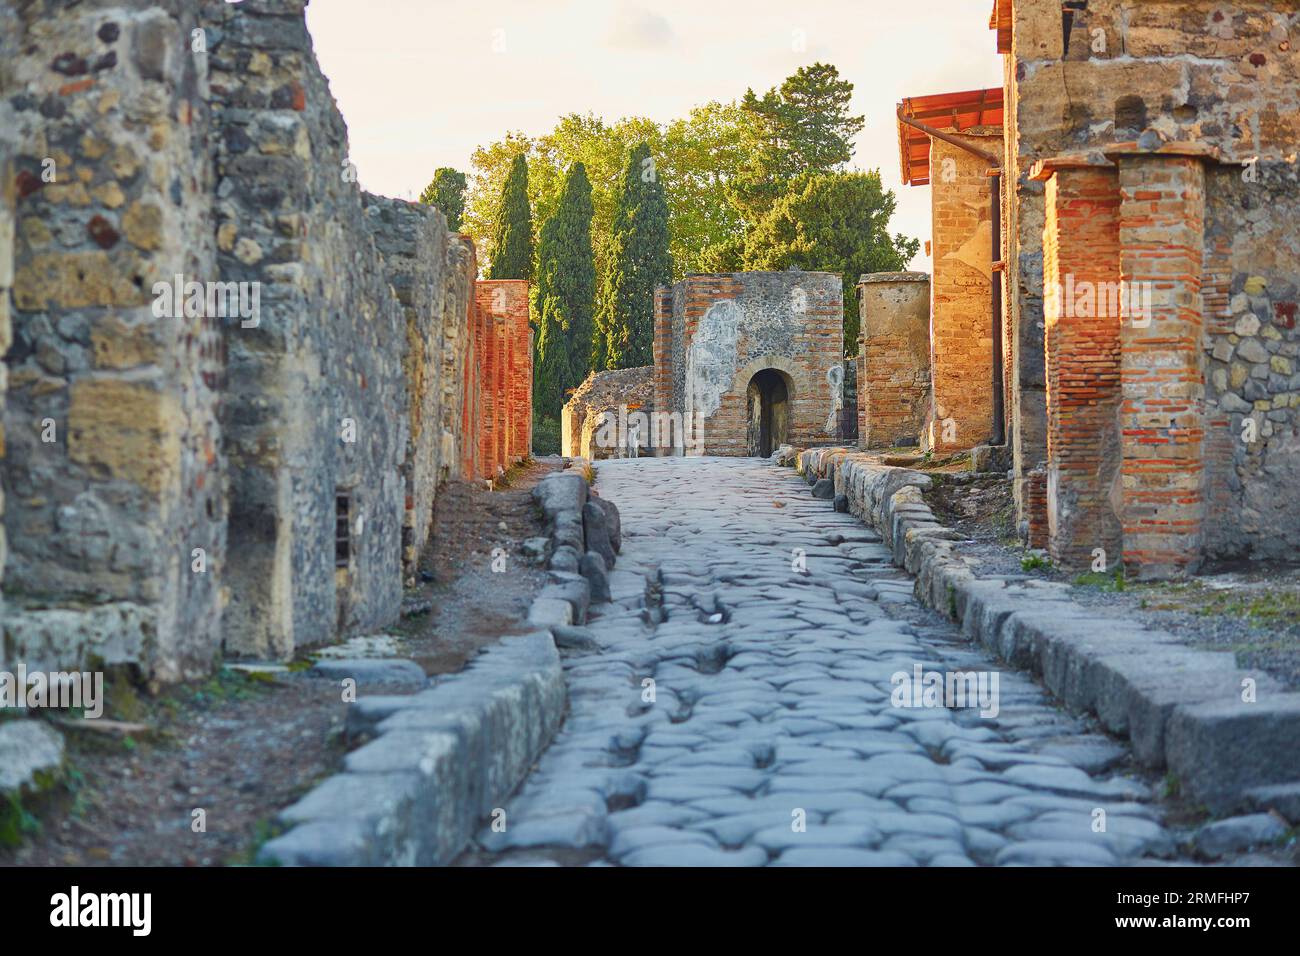 Ancient ruins in Pompeii, Roman town near modern Naples destroyed and buried under volcanic ash during eruption of Mount Vesuvius in 79 AD Stock Photo